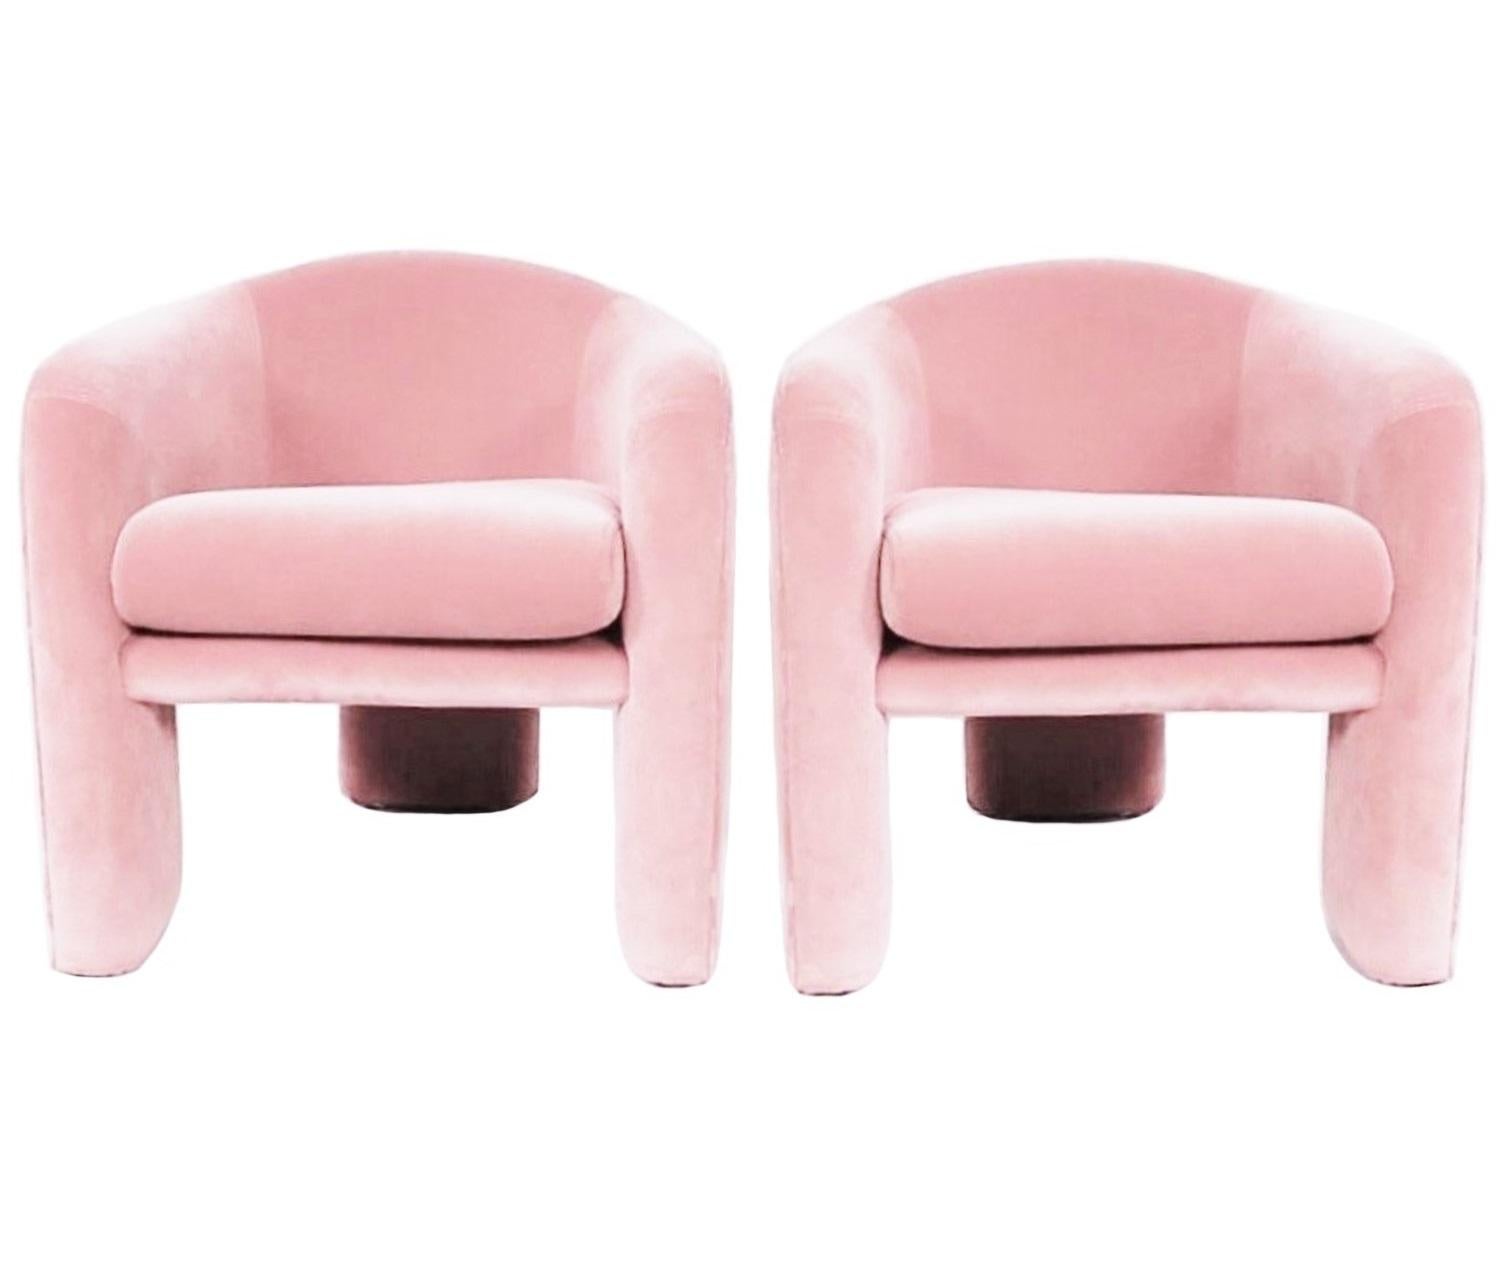 Pair of Modern Three-Legged Sculptural Armchairs by Preview Furniture Co.